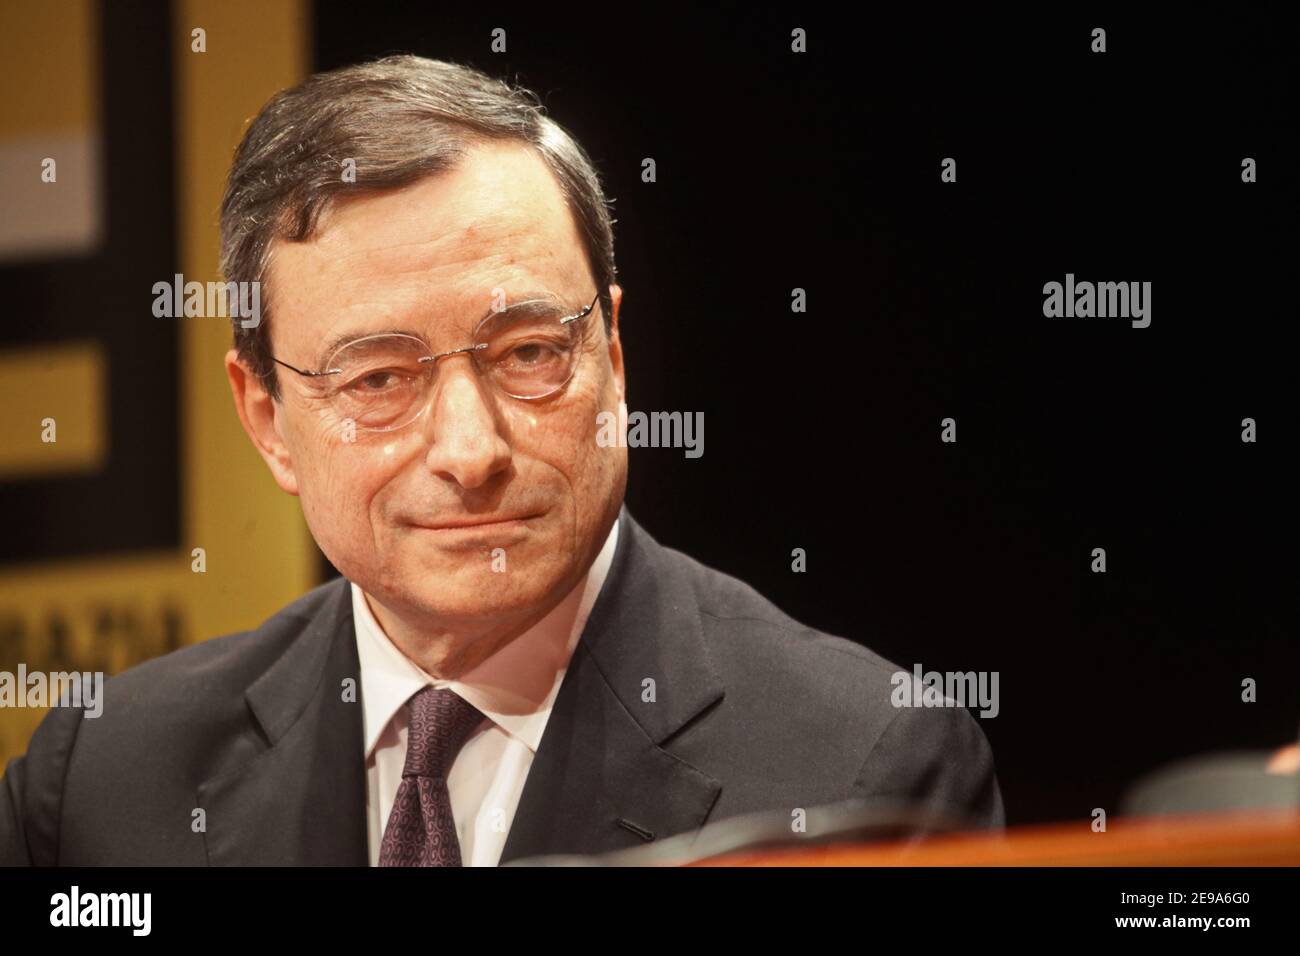 Mario Draghi, President of the European Central Bank , speaks at a press conference. Rome, Italy - April 2018 Stock Photo